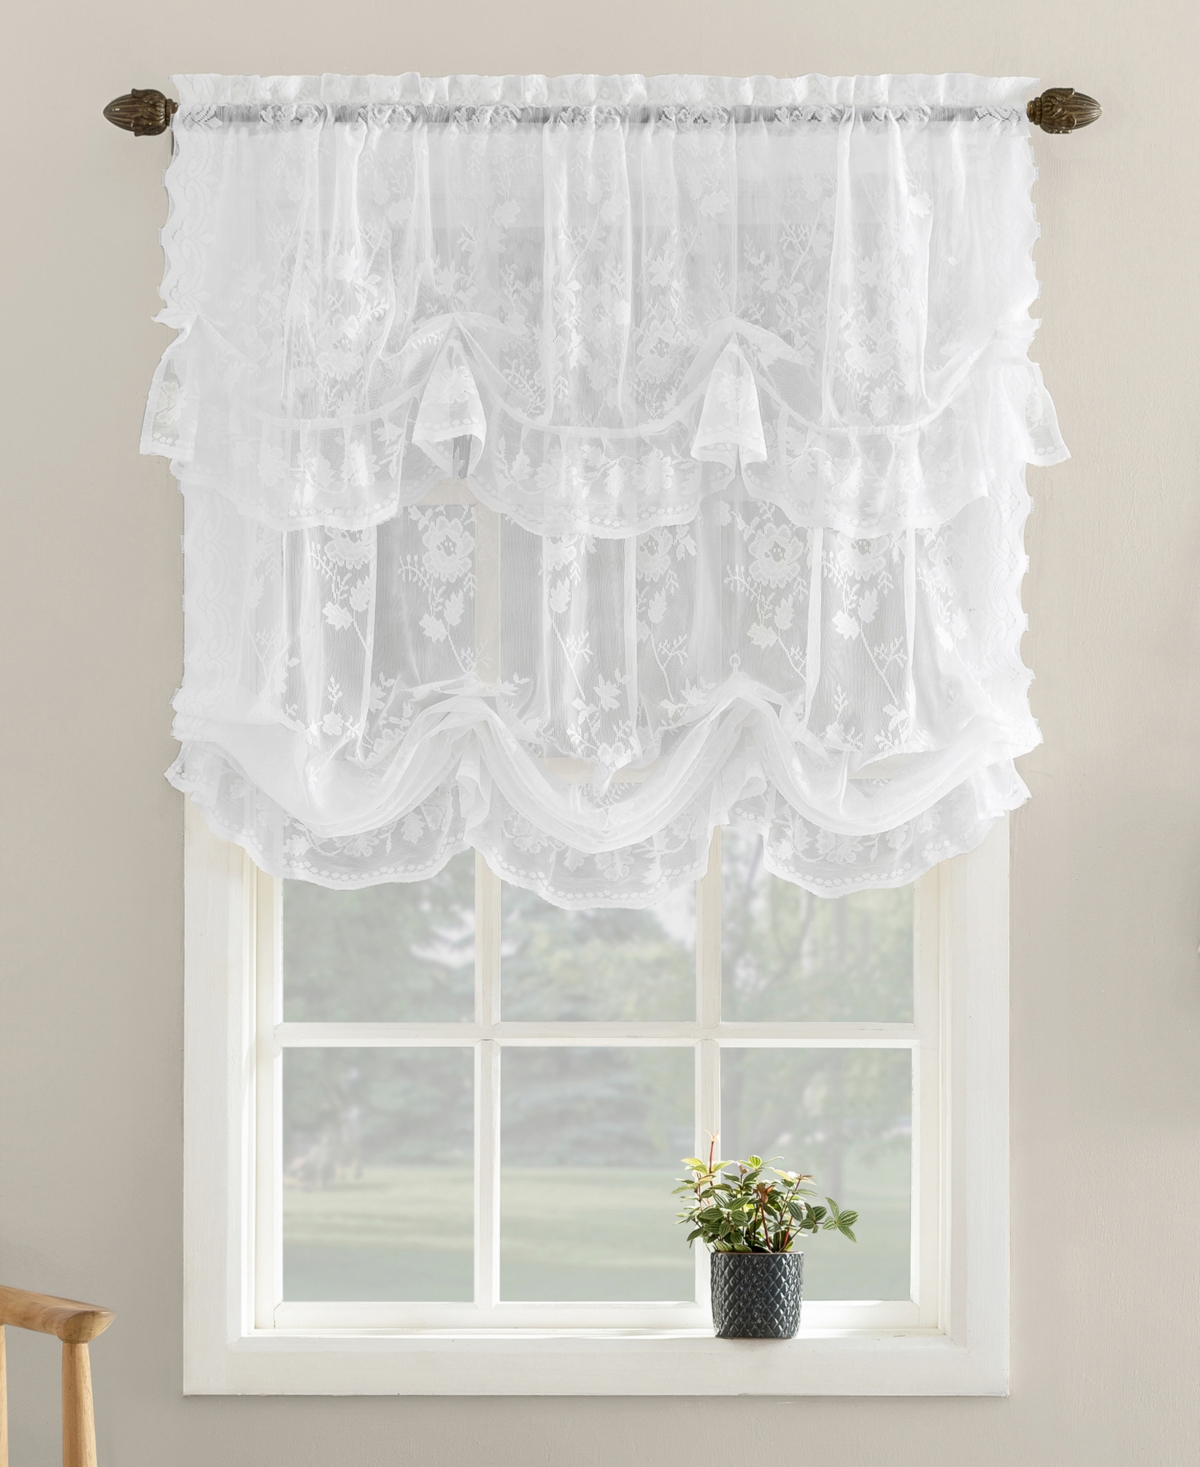 No. 918 Alison Floral Lace Sheer Rod Pocket Window Tie-up Shade, 63" X 59" In White